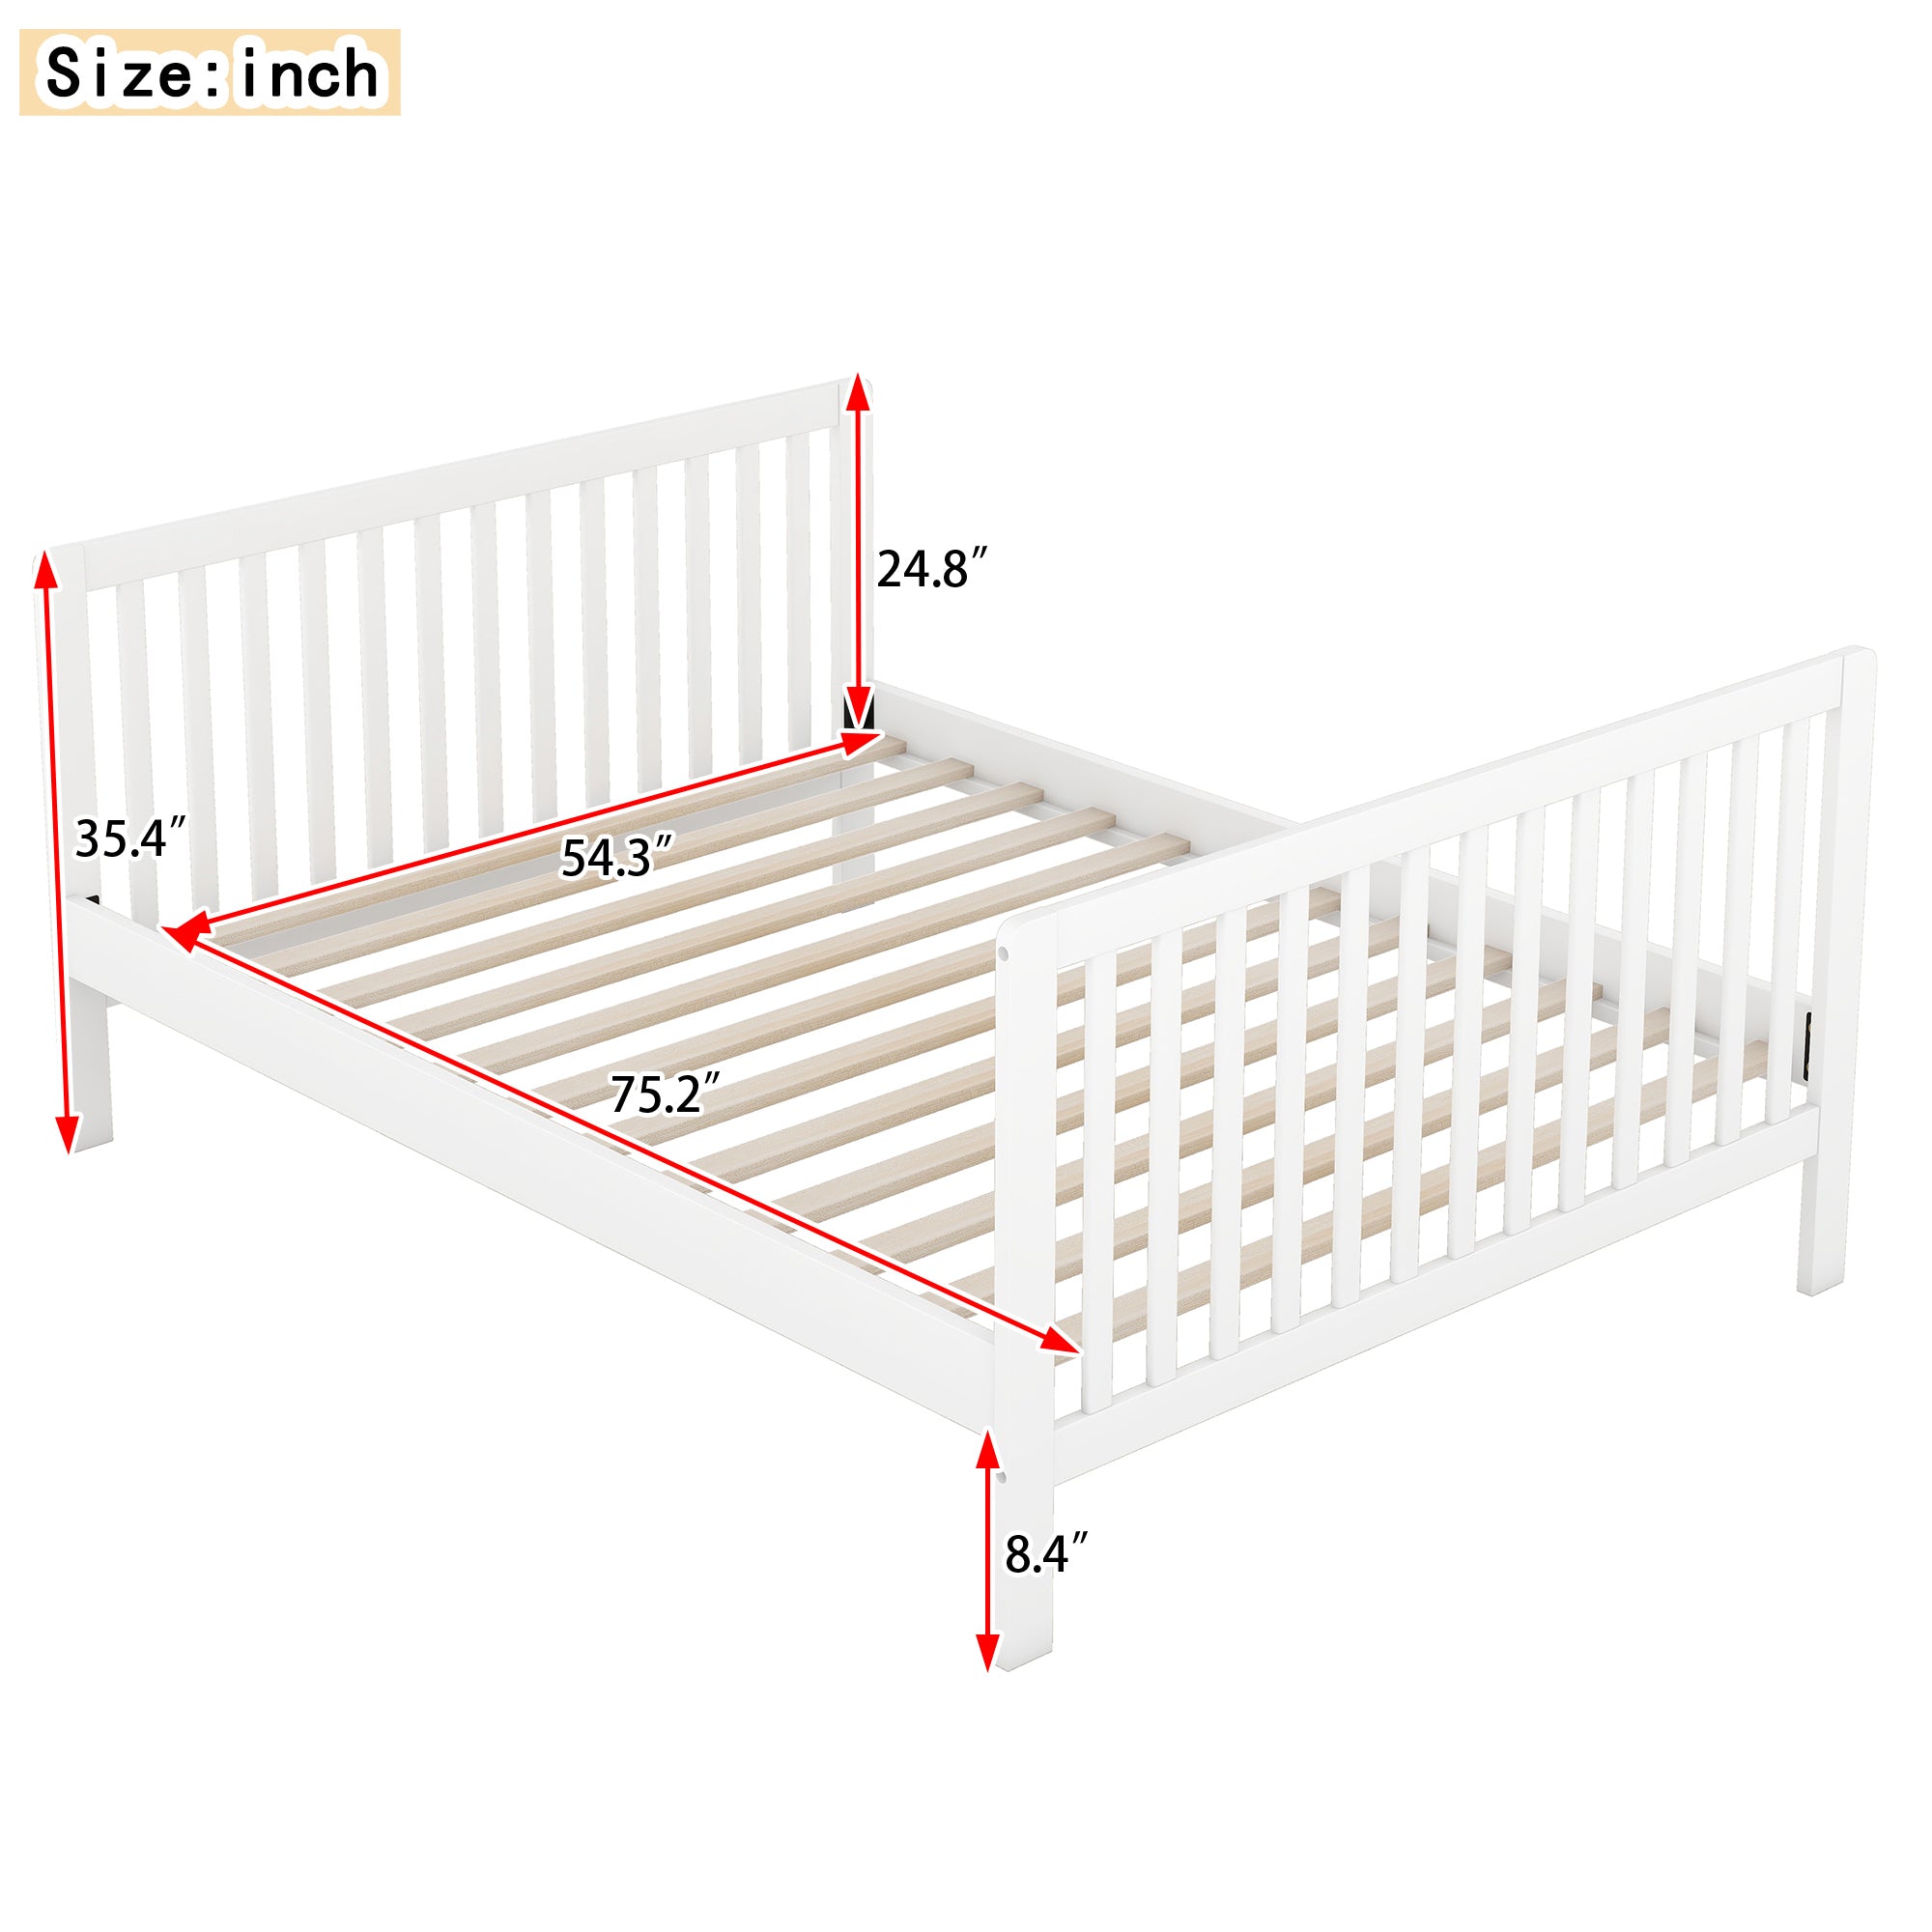 Convertible Crib/Full Size Bed with Changing Table - White